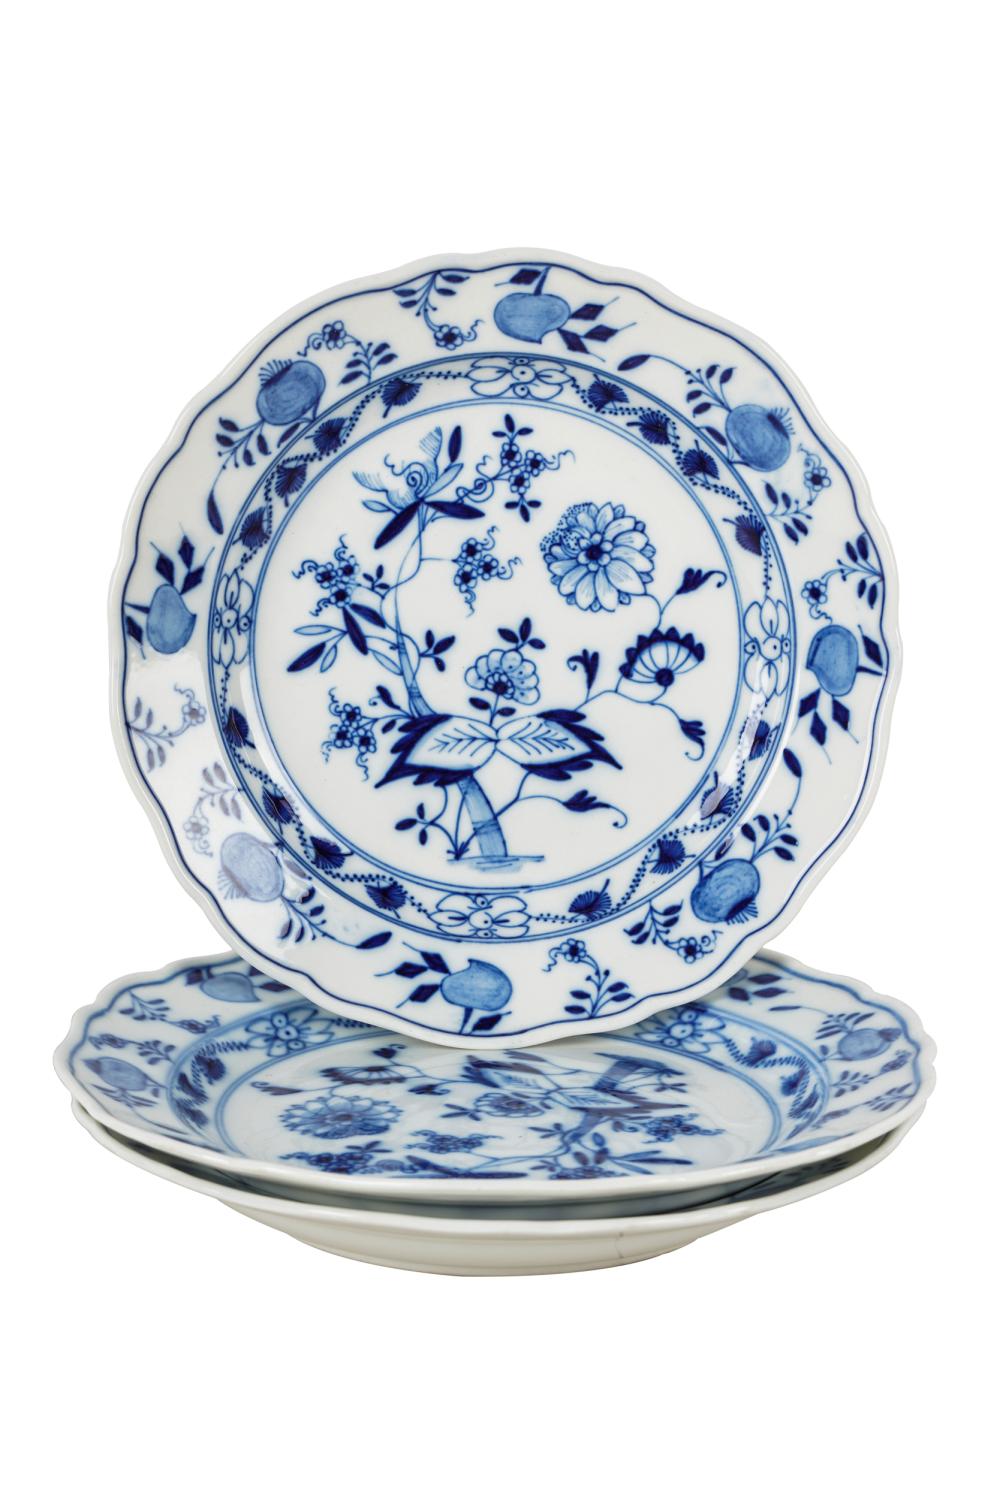 THREE MEISSEN PLATESeach with makers